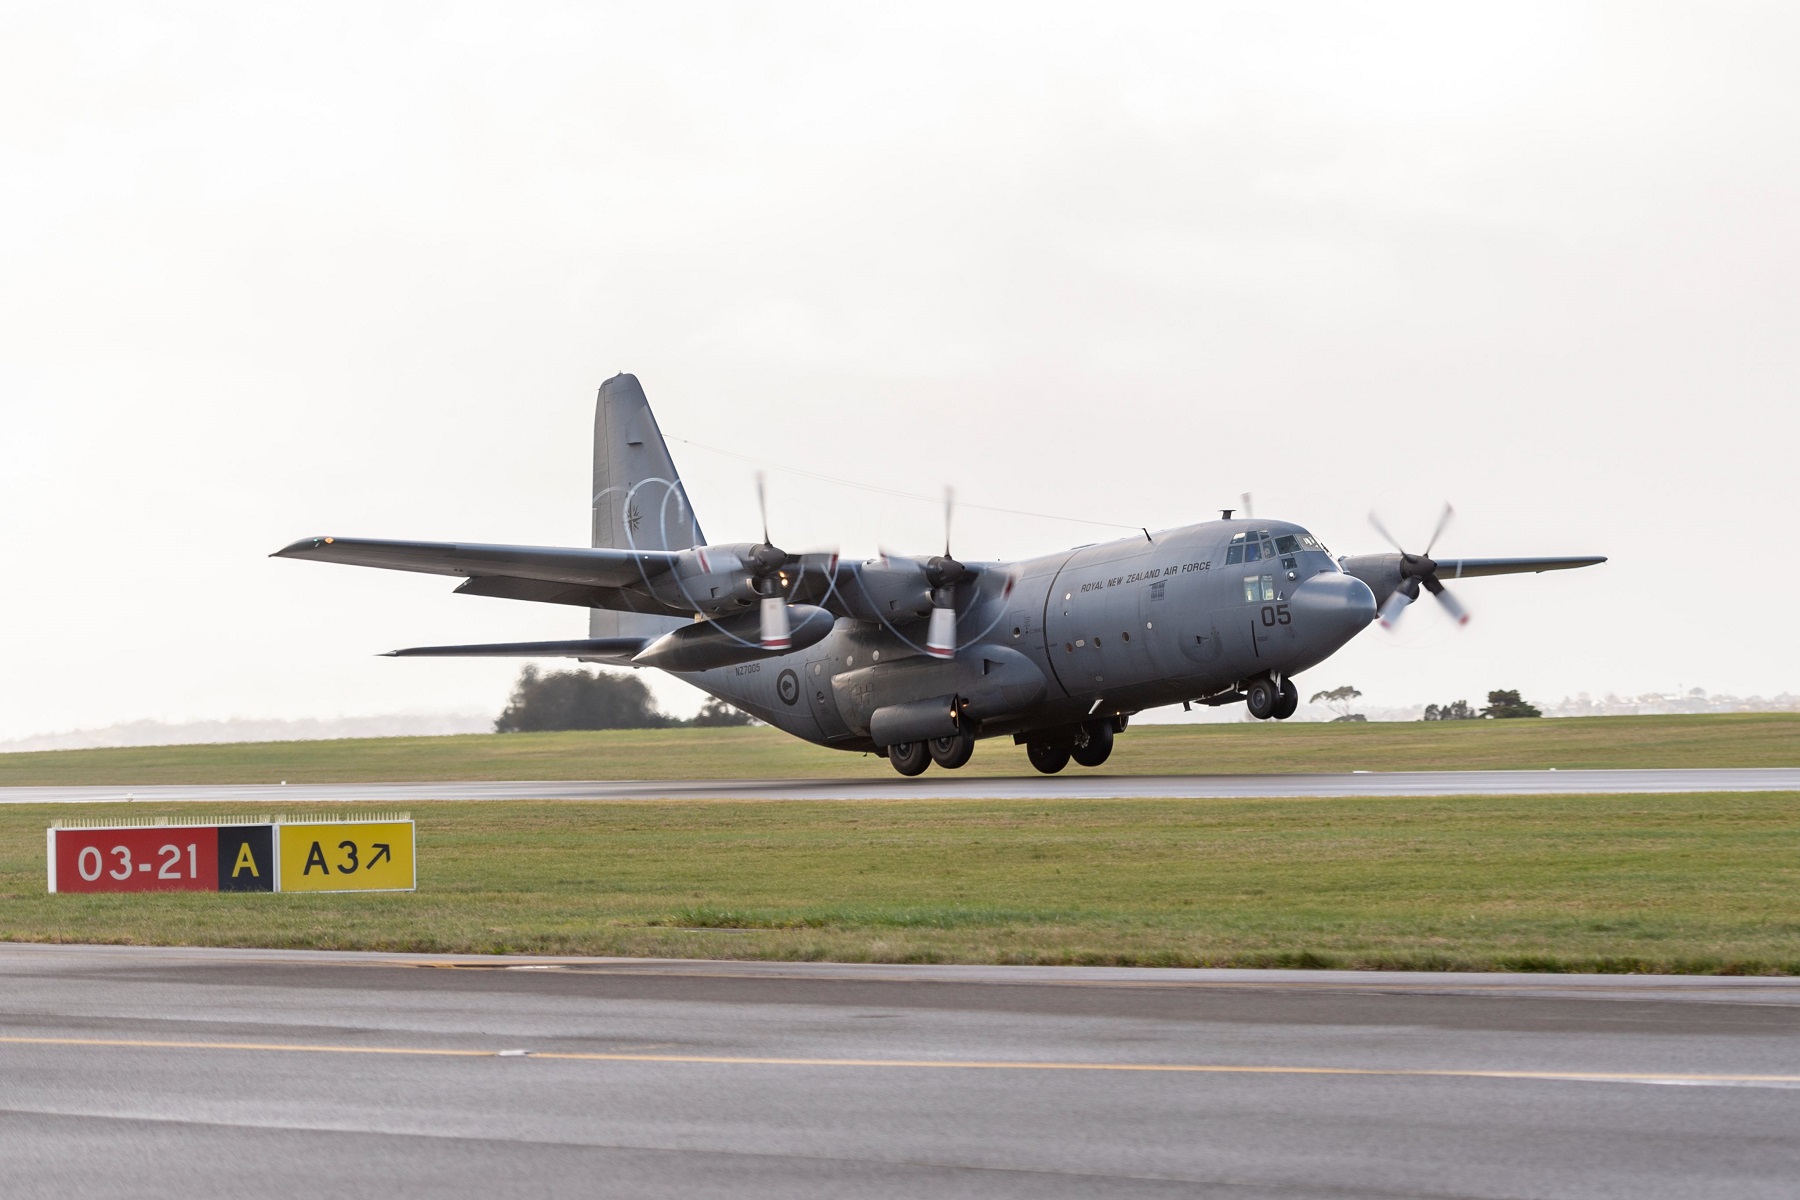 Royal New Zealand Air Force C-130HNZ Hercules Deploy to Assist with Evacuations from Afghanistan